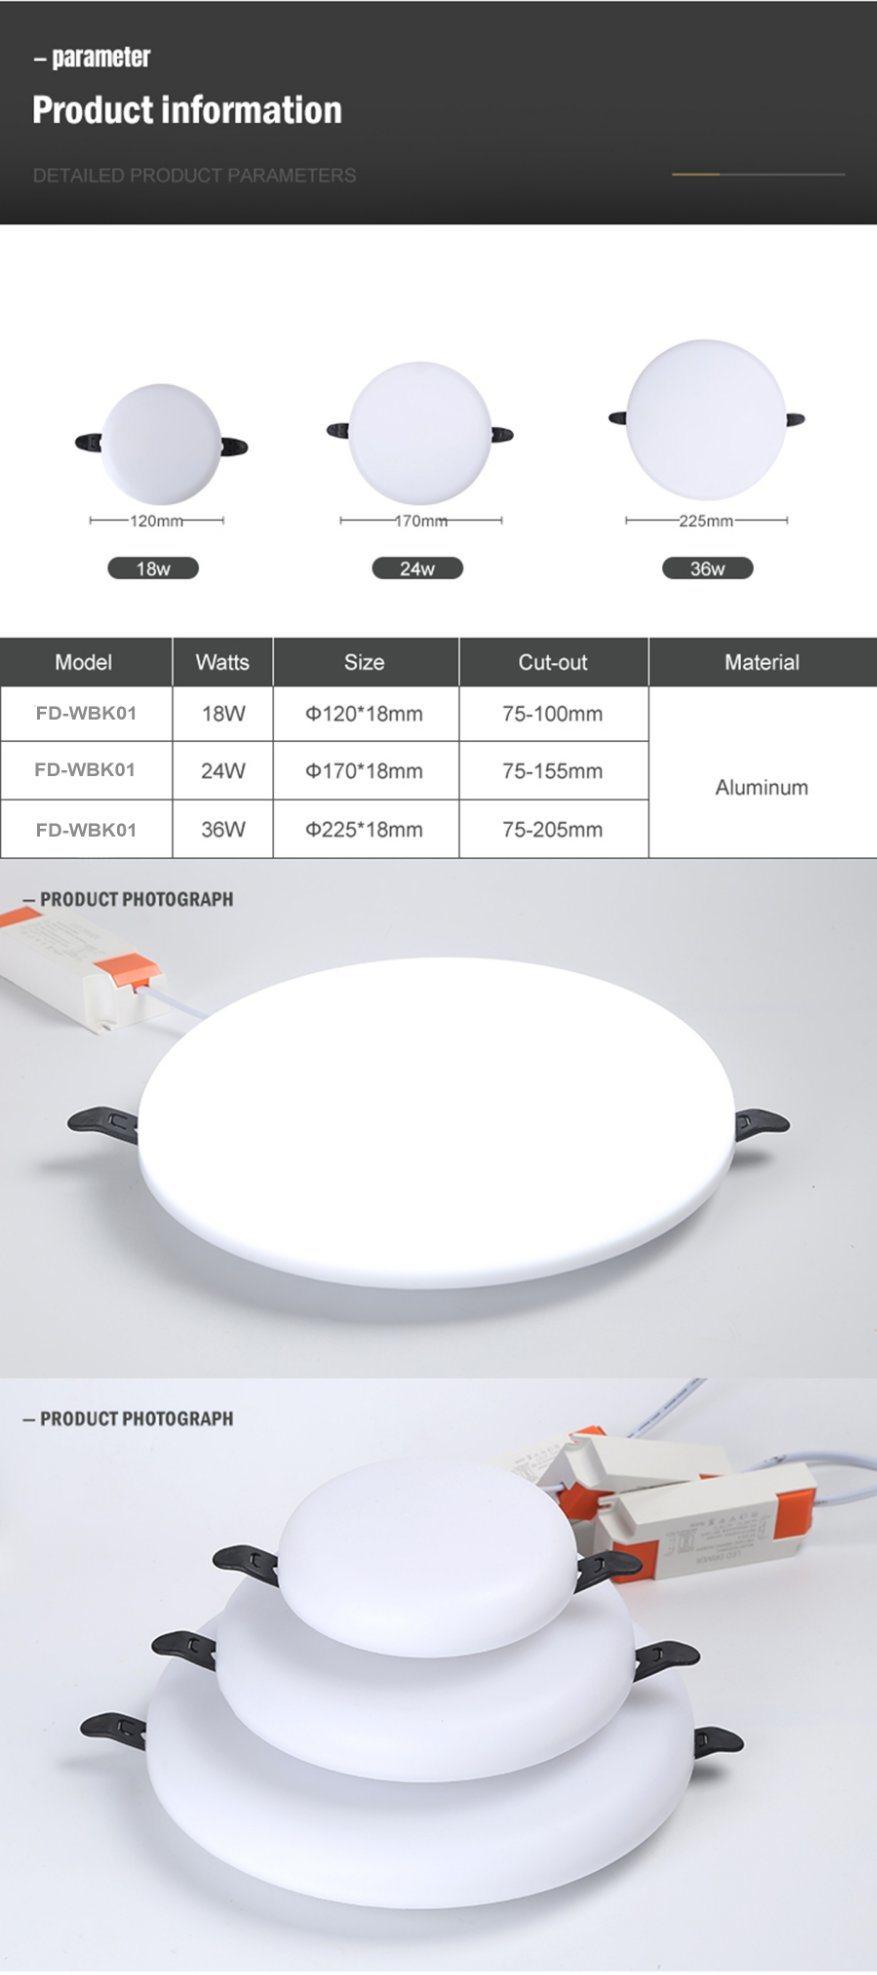 Cutout Hole Size Adjustable Frameless Round Down Light Recessed Square Ceiling LED Panel Light